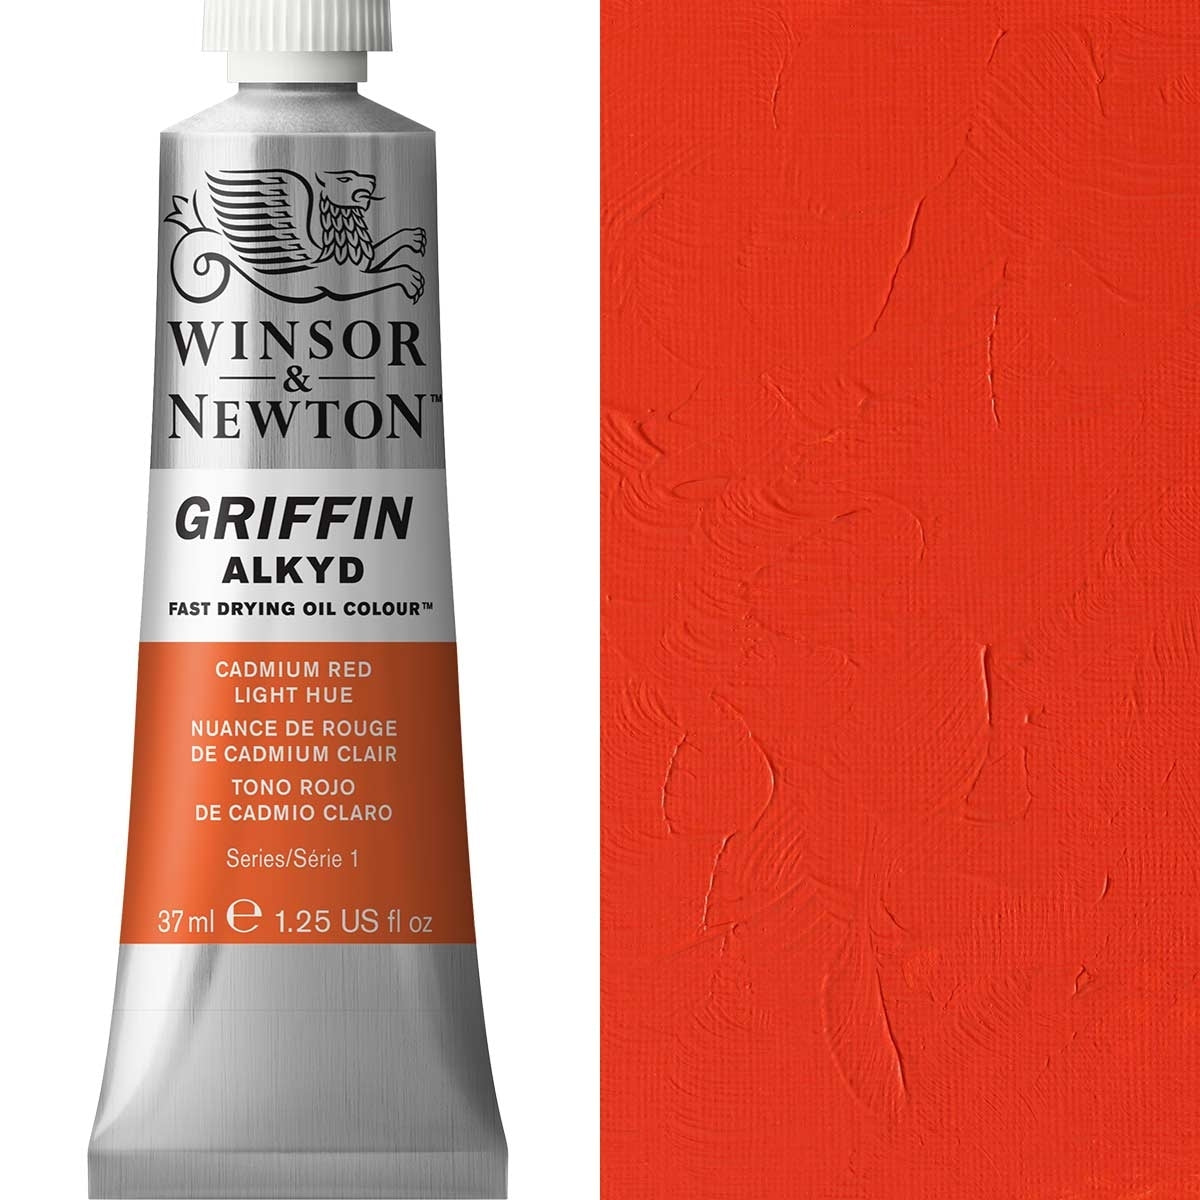 Winsor and Newton - Griffin ALKYD Oil Colour - 37ml - Cadmium Red Light Hue